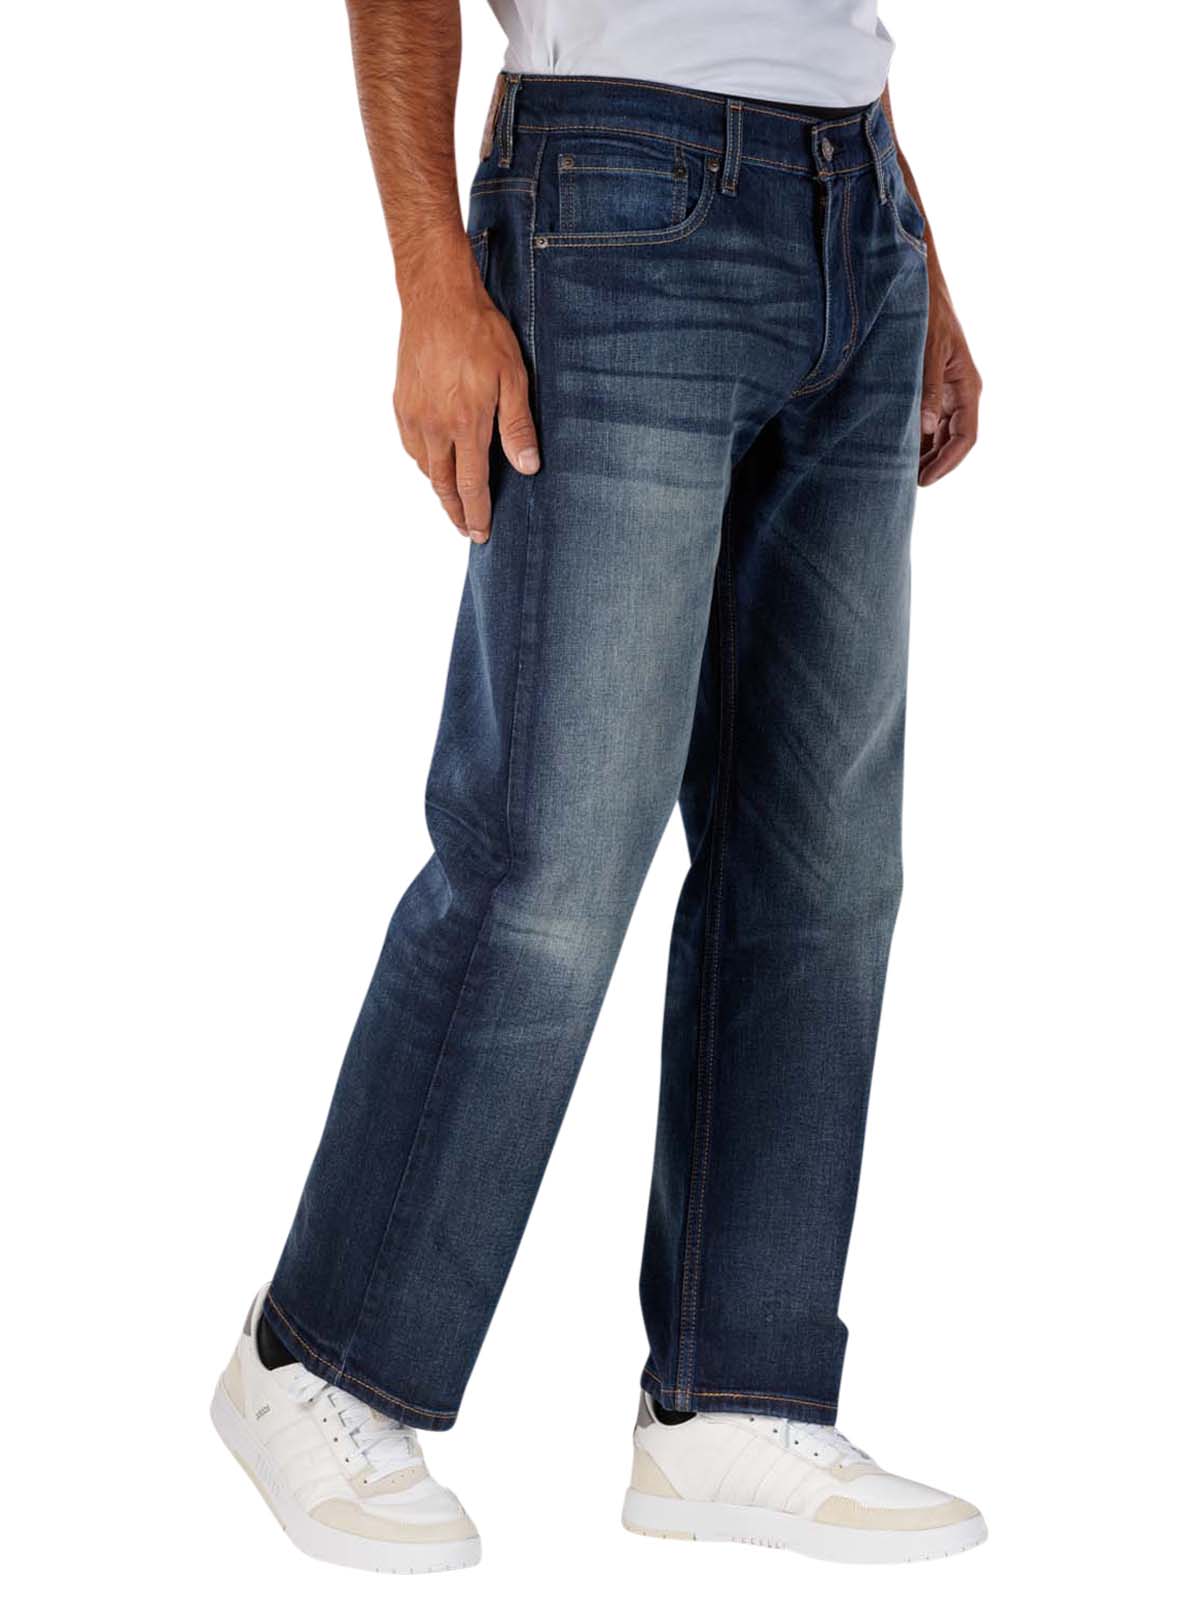 Levi's 569 Jeans Relaxed Fit crosstown Levi's Men's Jeans | Free Shipping  on  - SIMPLY LOOK GOOD